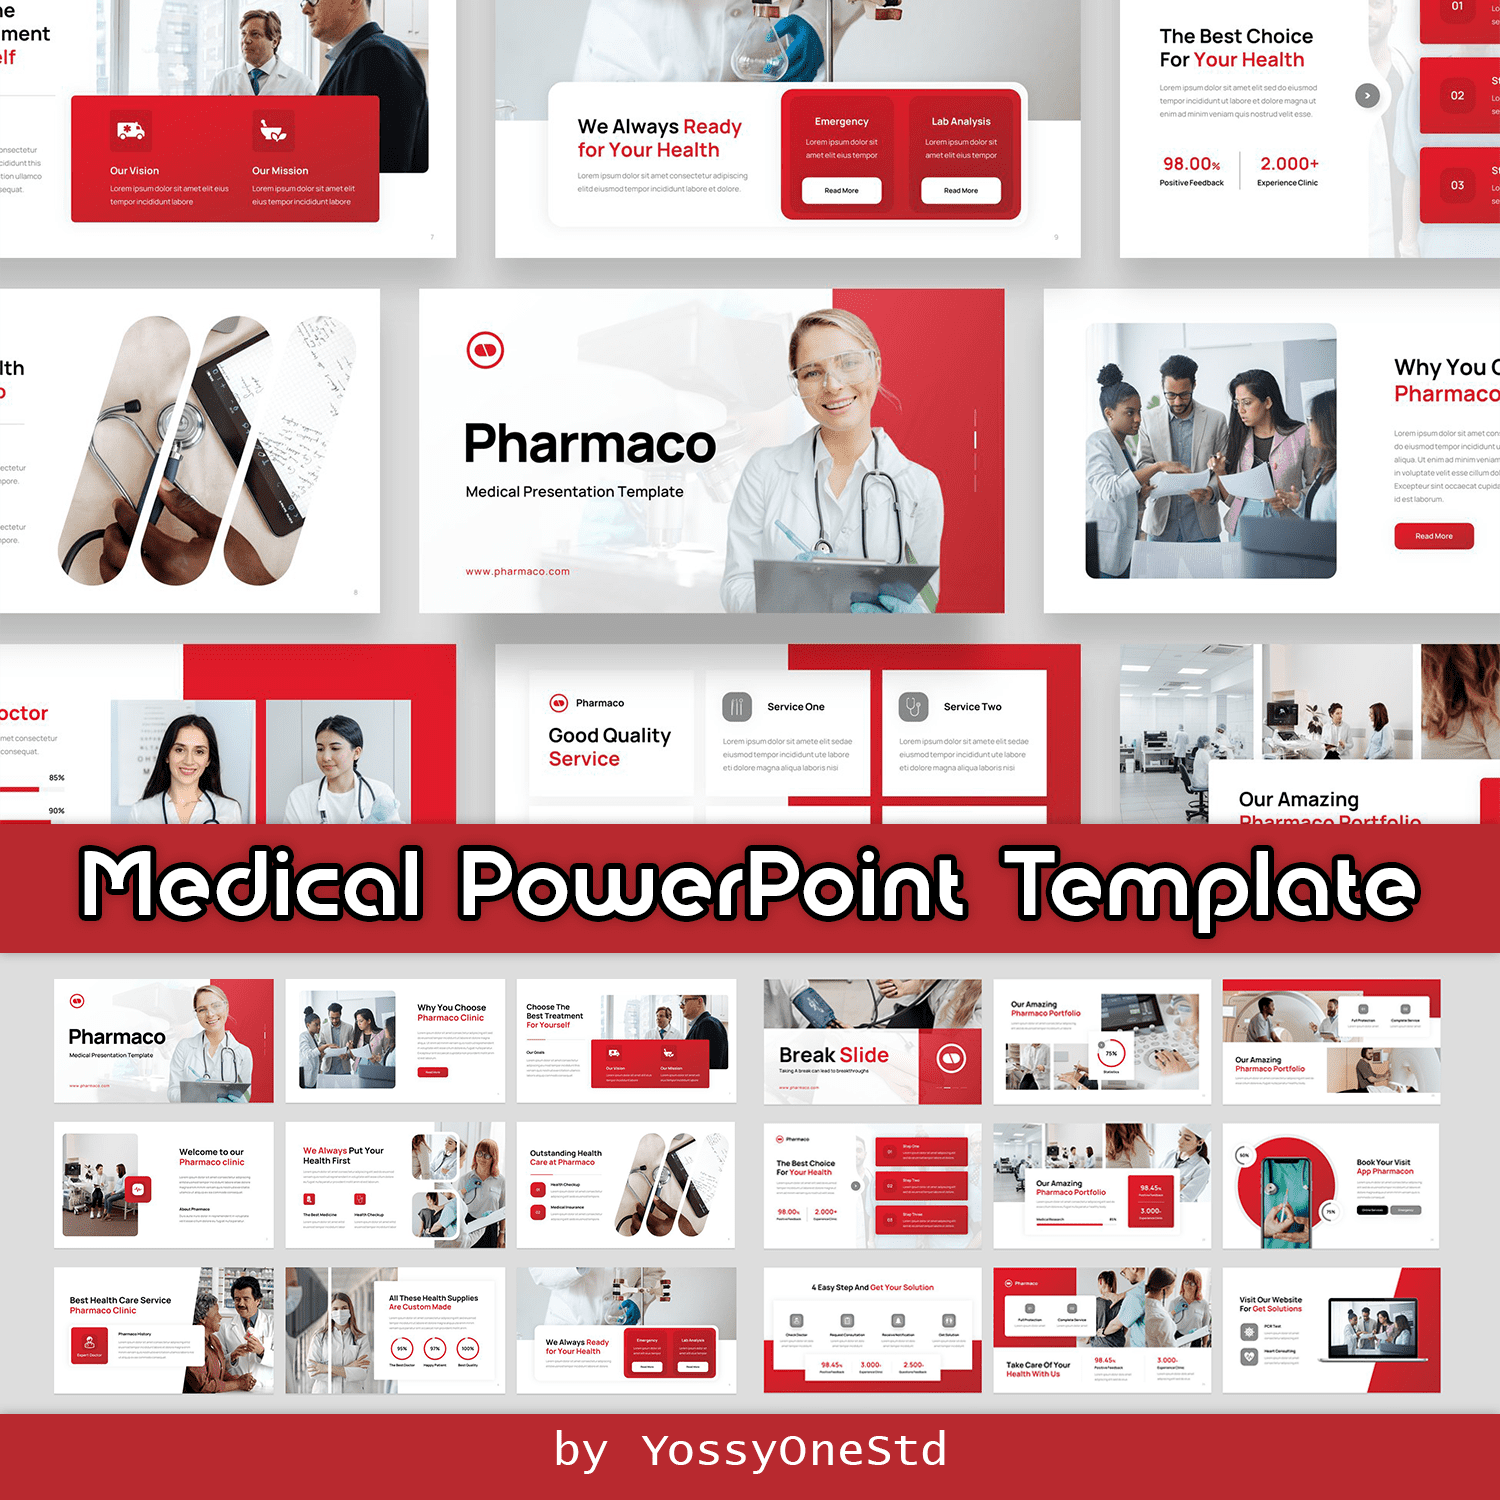 Medical PowerPoint Template cover.